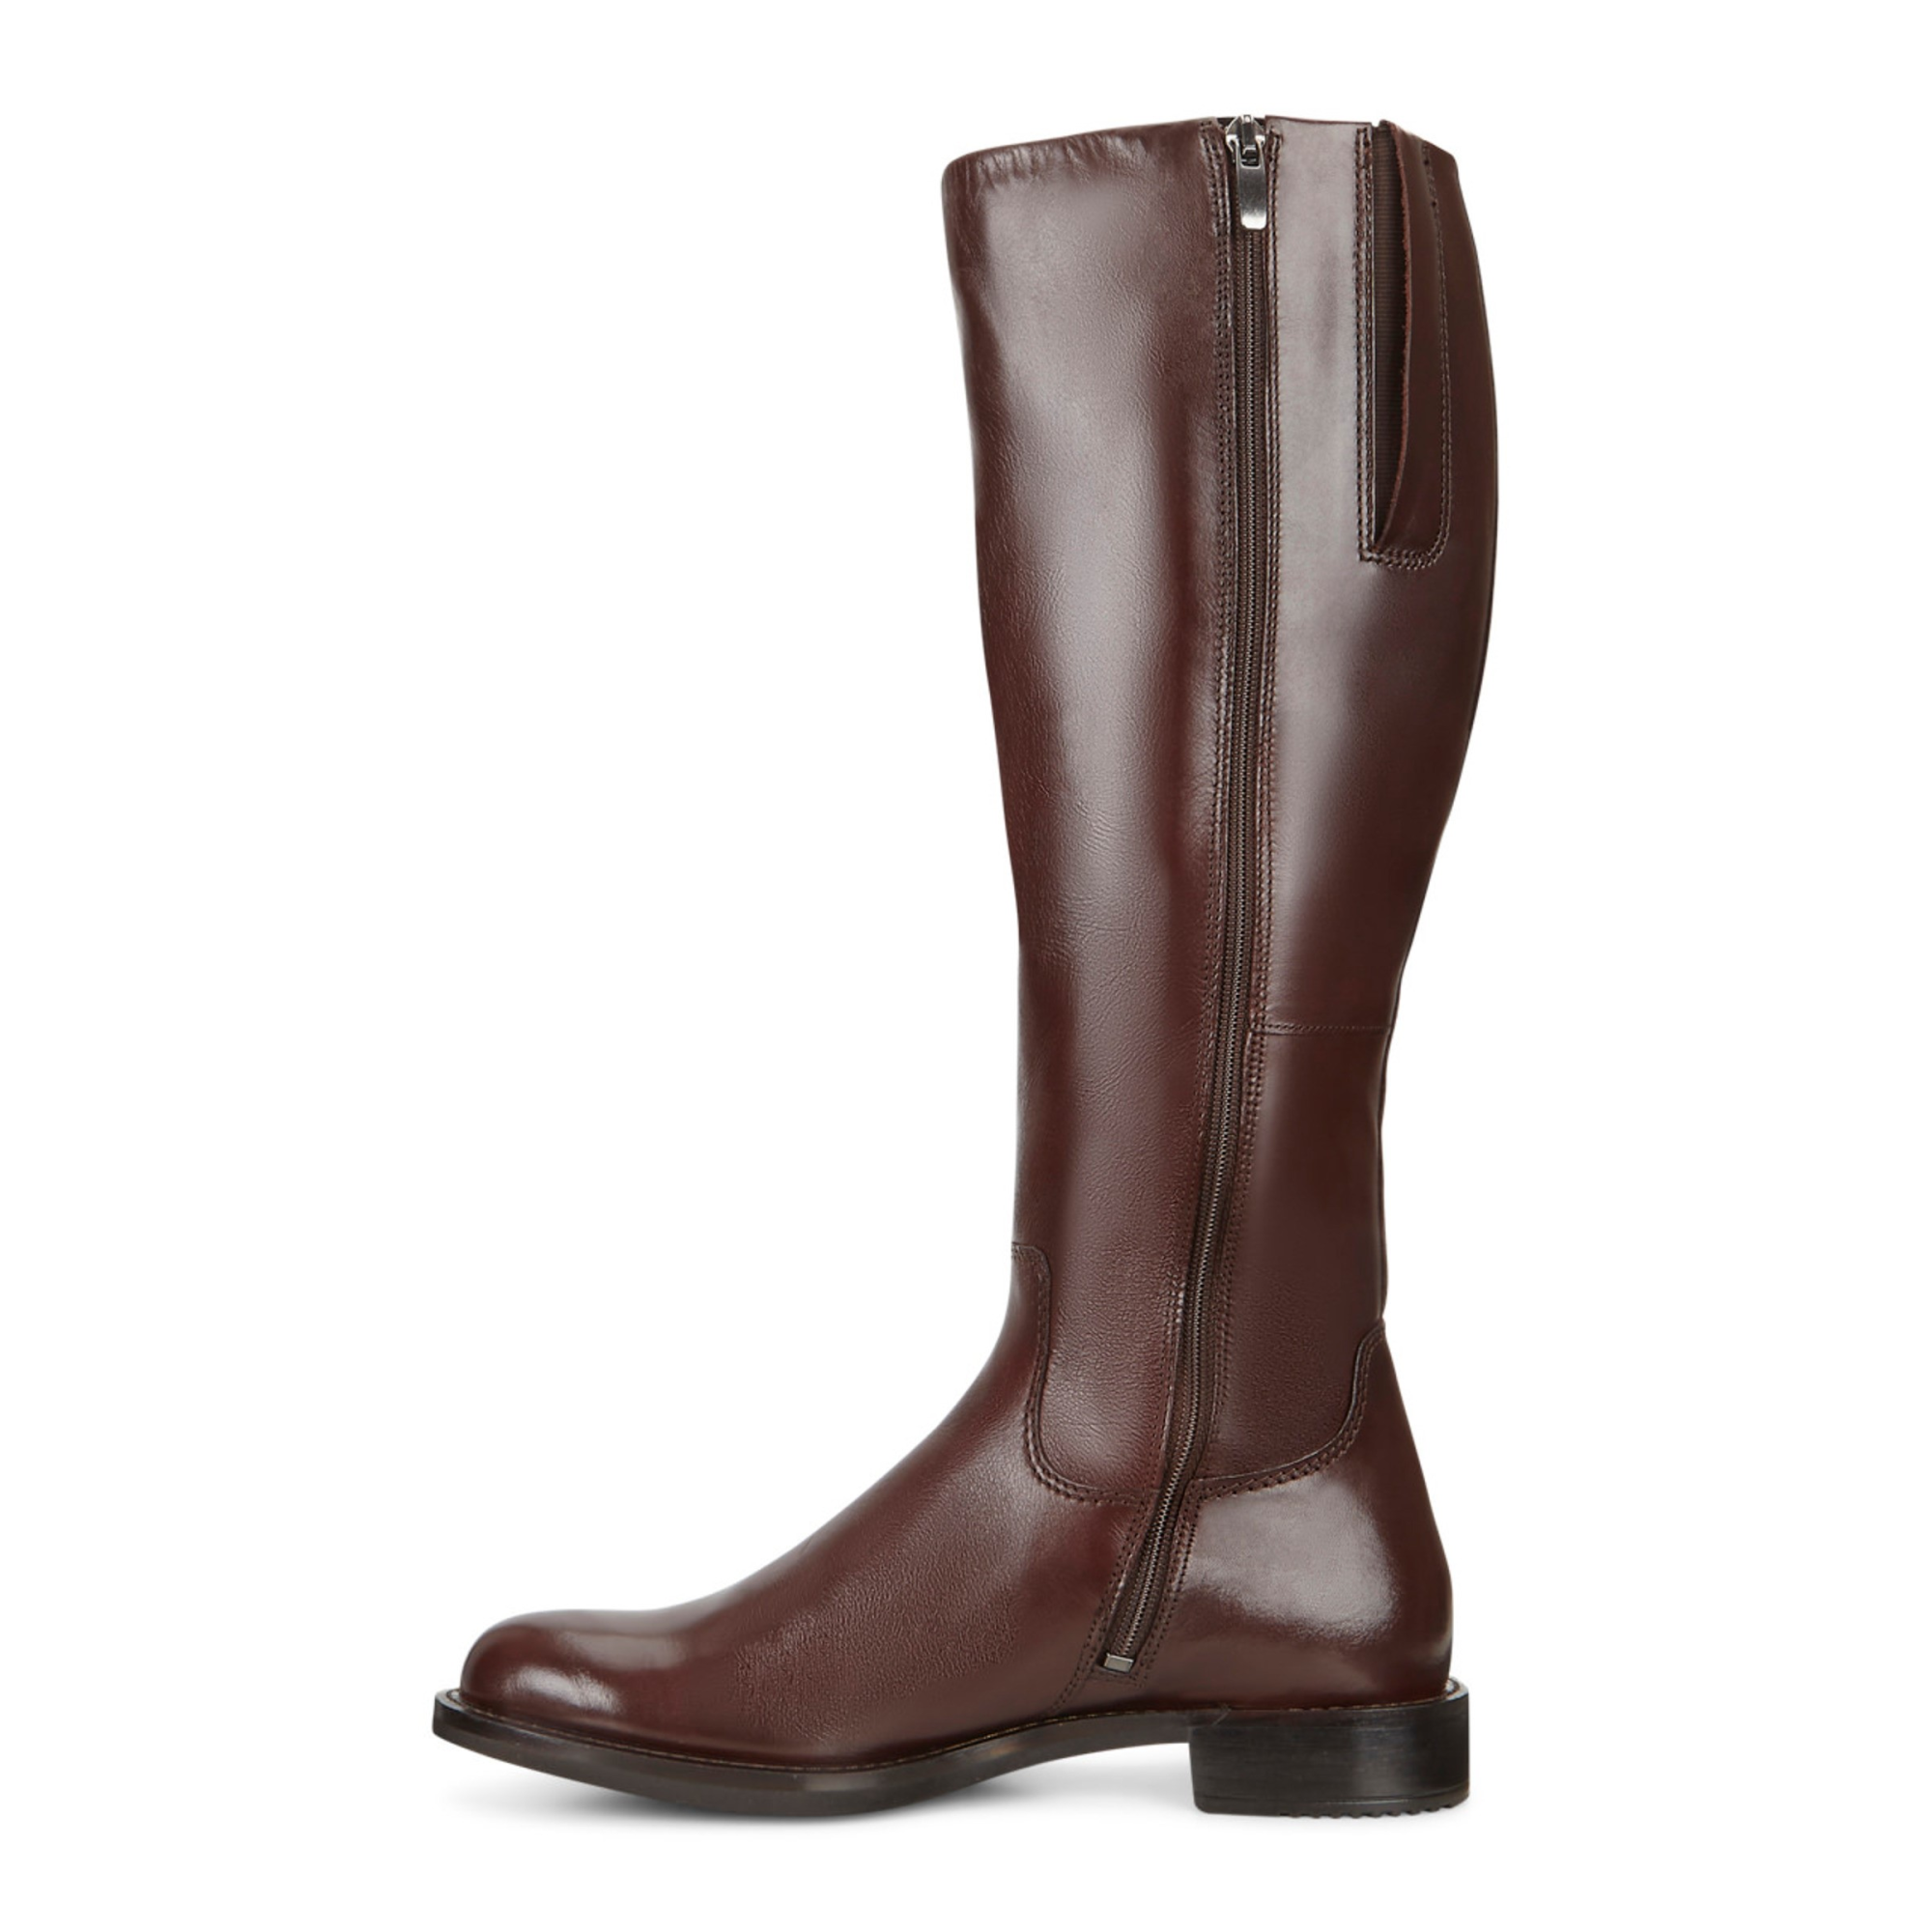 Ecco Shape Riding Boot 35 - Products - Veryk Mall - Veryk Mall, many quick response, safe your money!